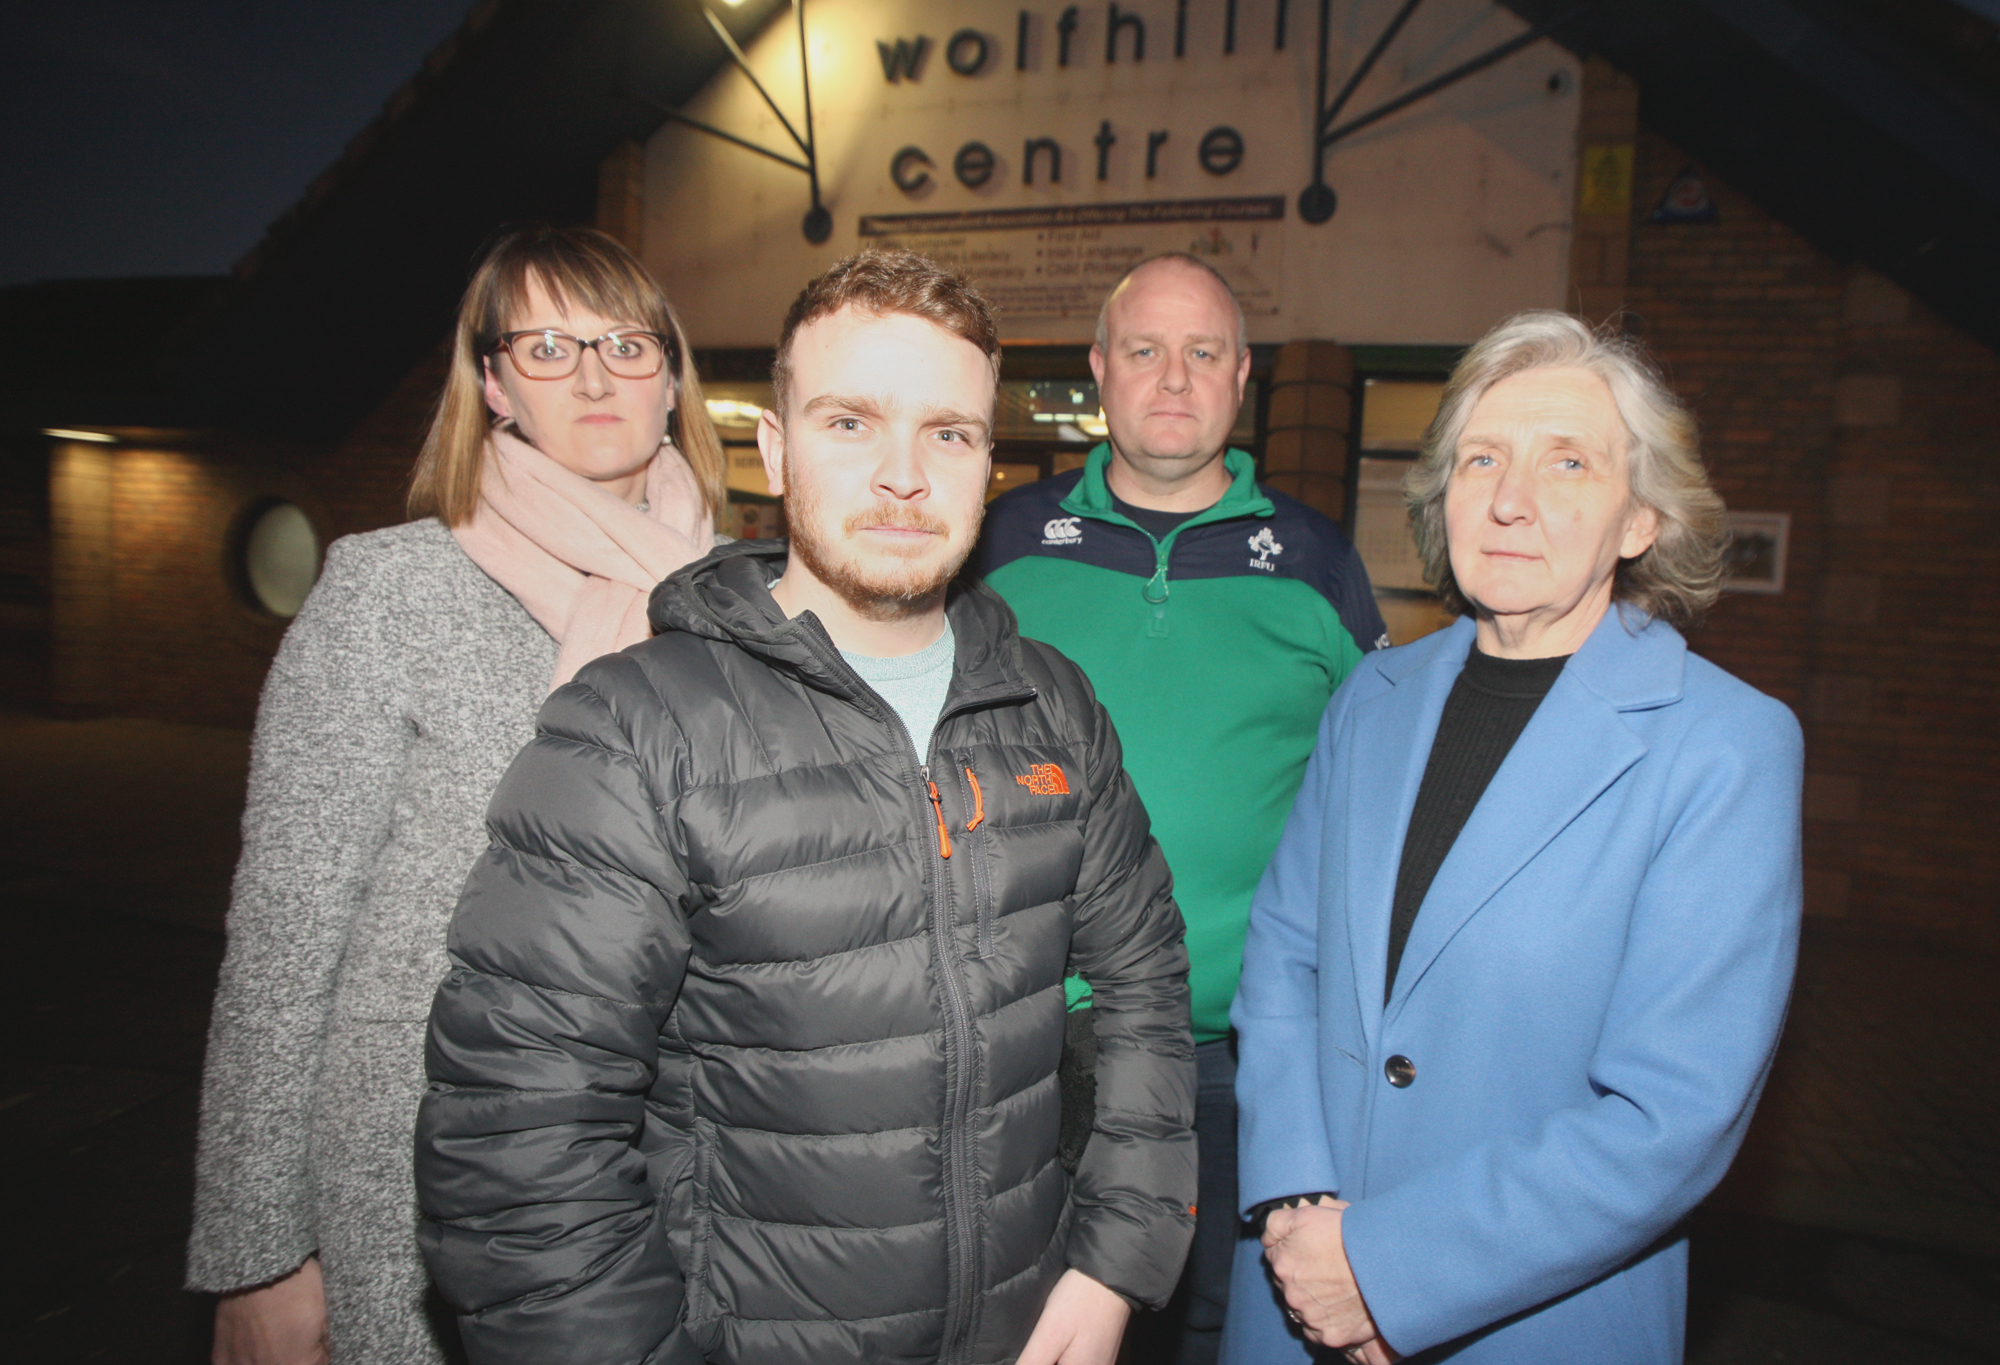 ANGER: Thornberry residents Magdalena Bisewska and Ciaran McCrea with Sinn Féin councillor Ryan Murphy and Maria Morgan from the Wolfhill Centre in Ligoniel